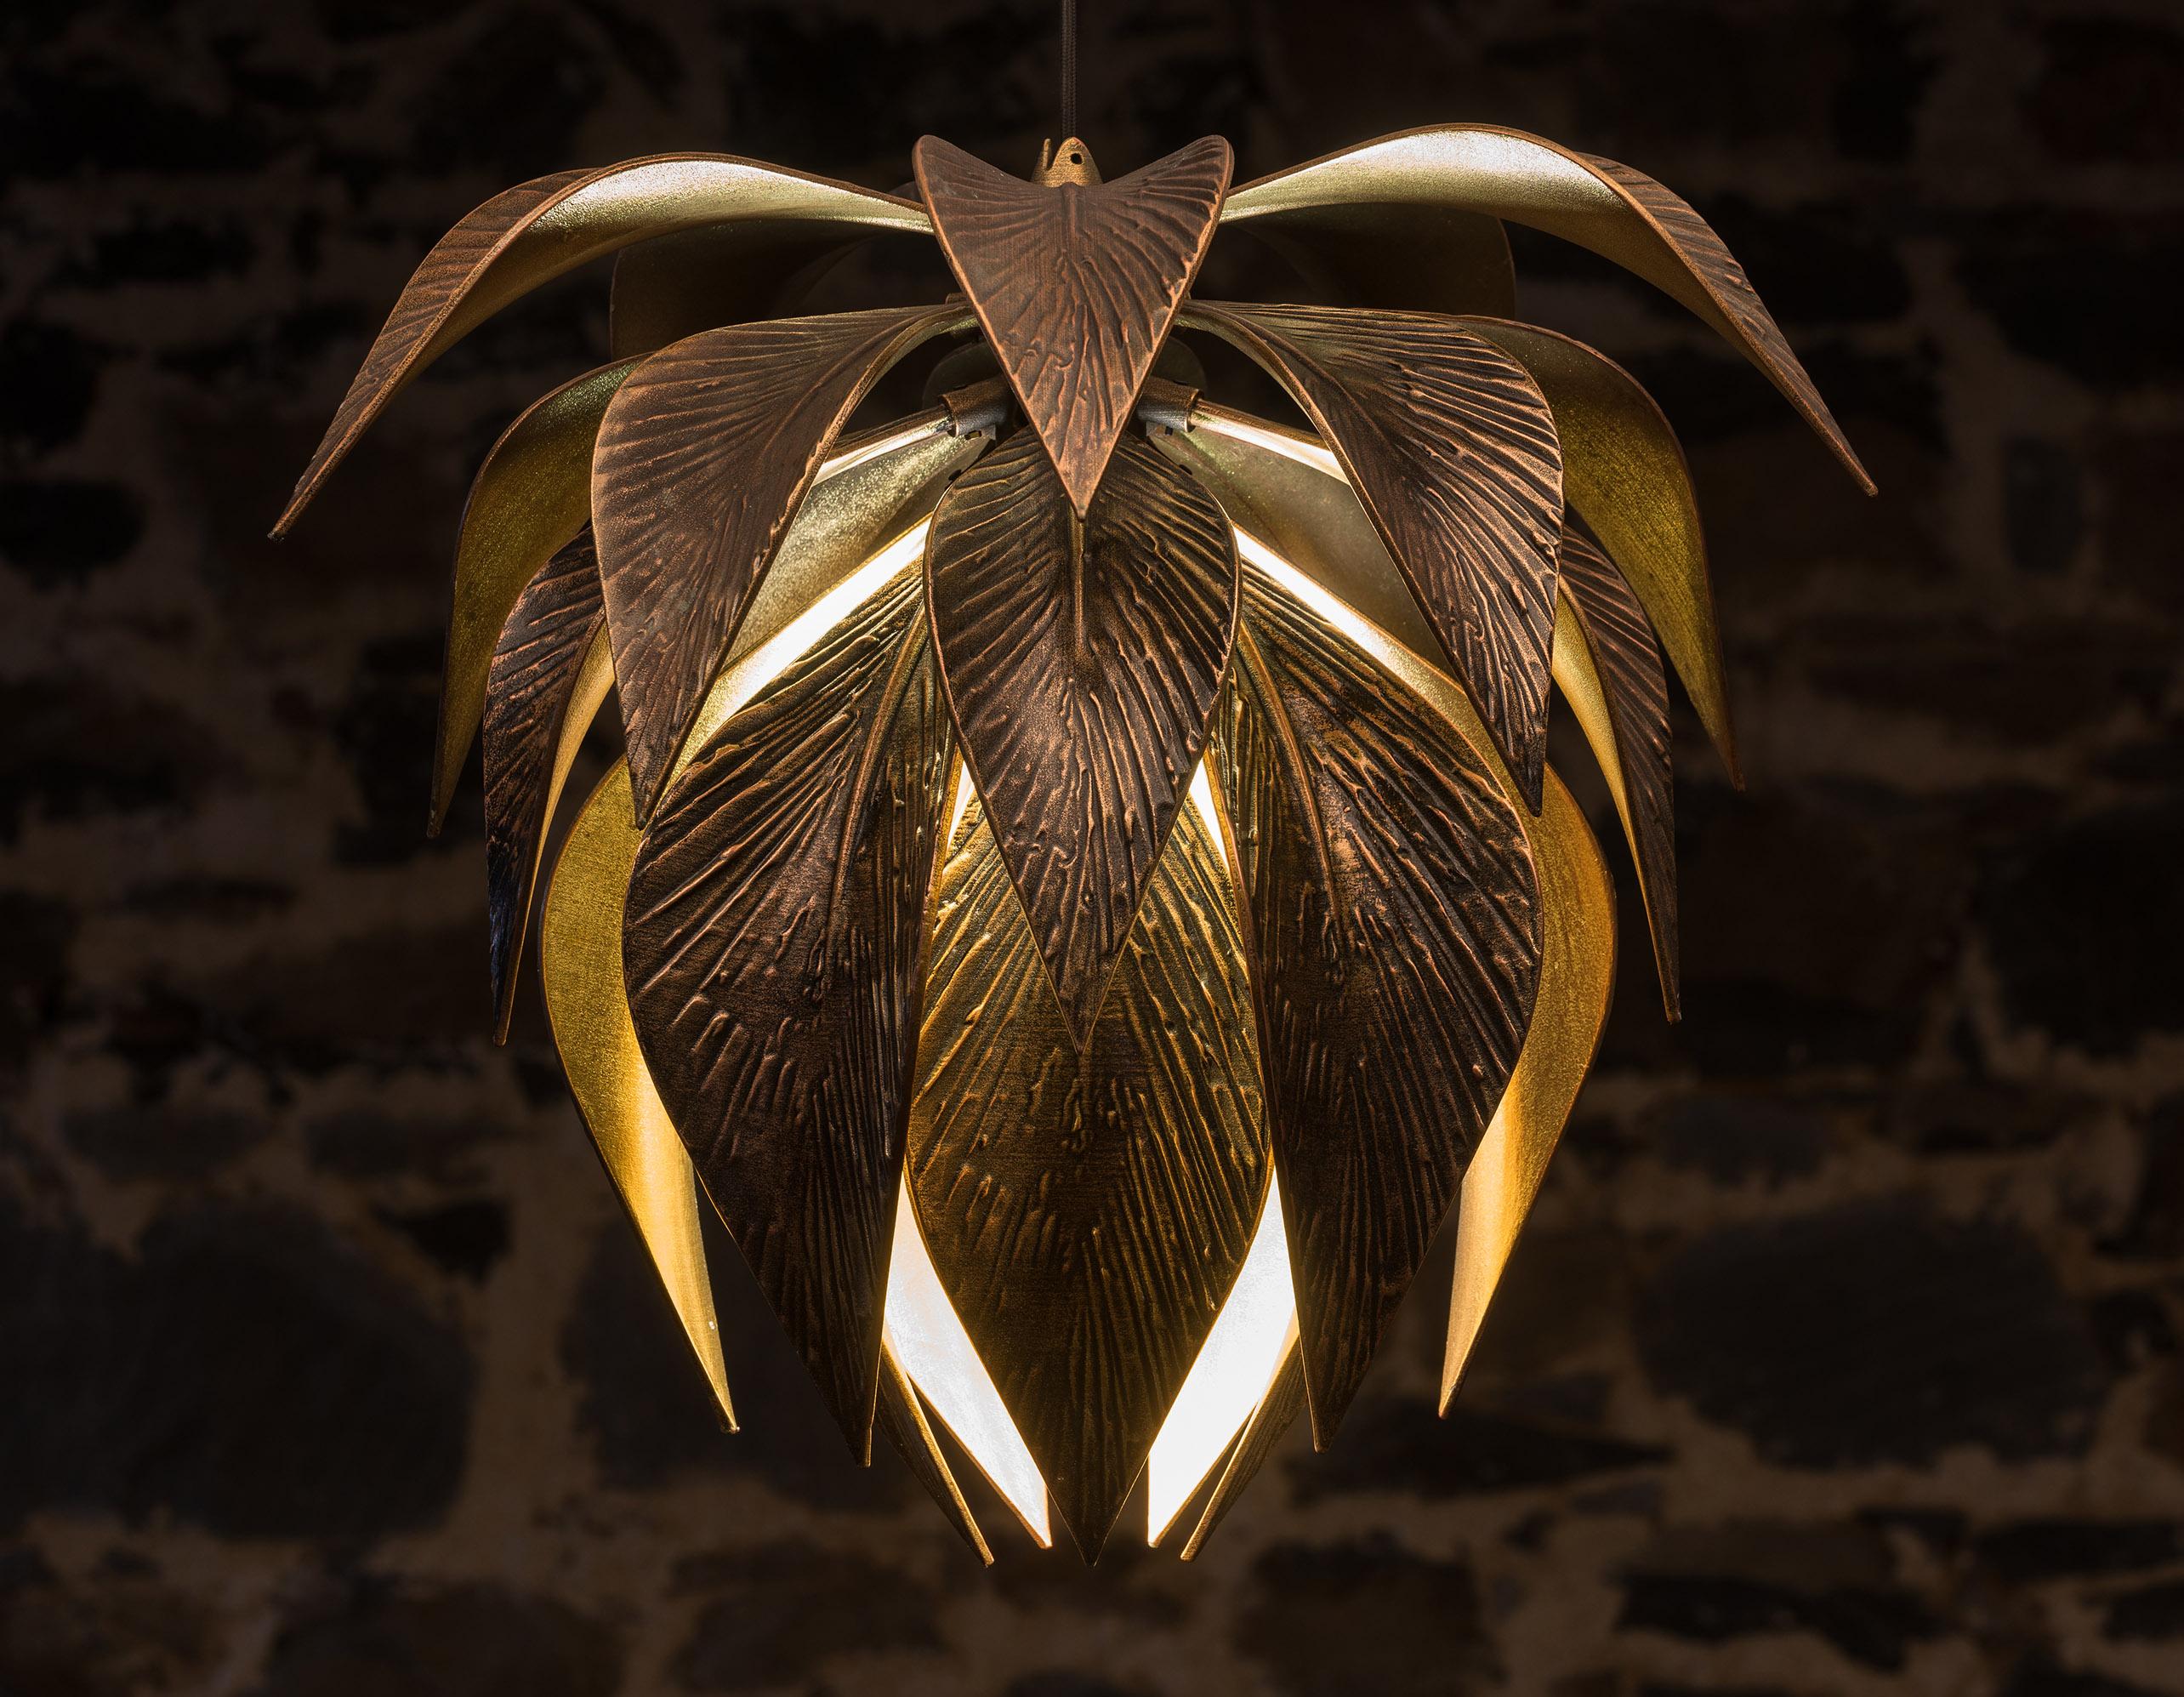 The Lotus Pendant Light exudes luxury and sophistication, offering a spectacular glimpse of both the top and underside of each leaf. Each angle of the light provides a unique and mesmerizing view of its metallic leaves. This pendant can be hung at